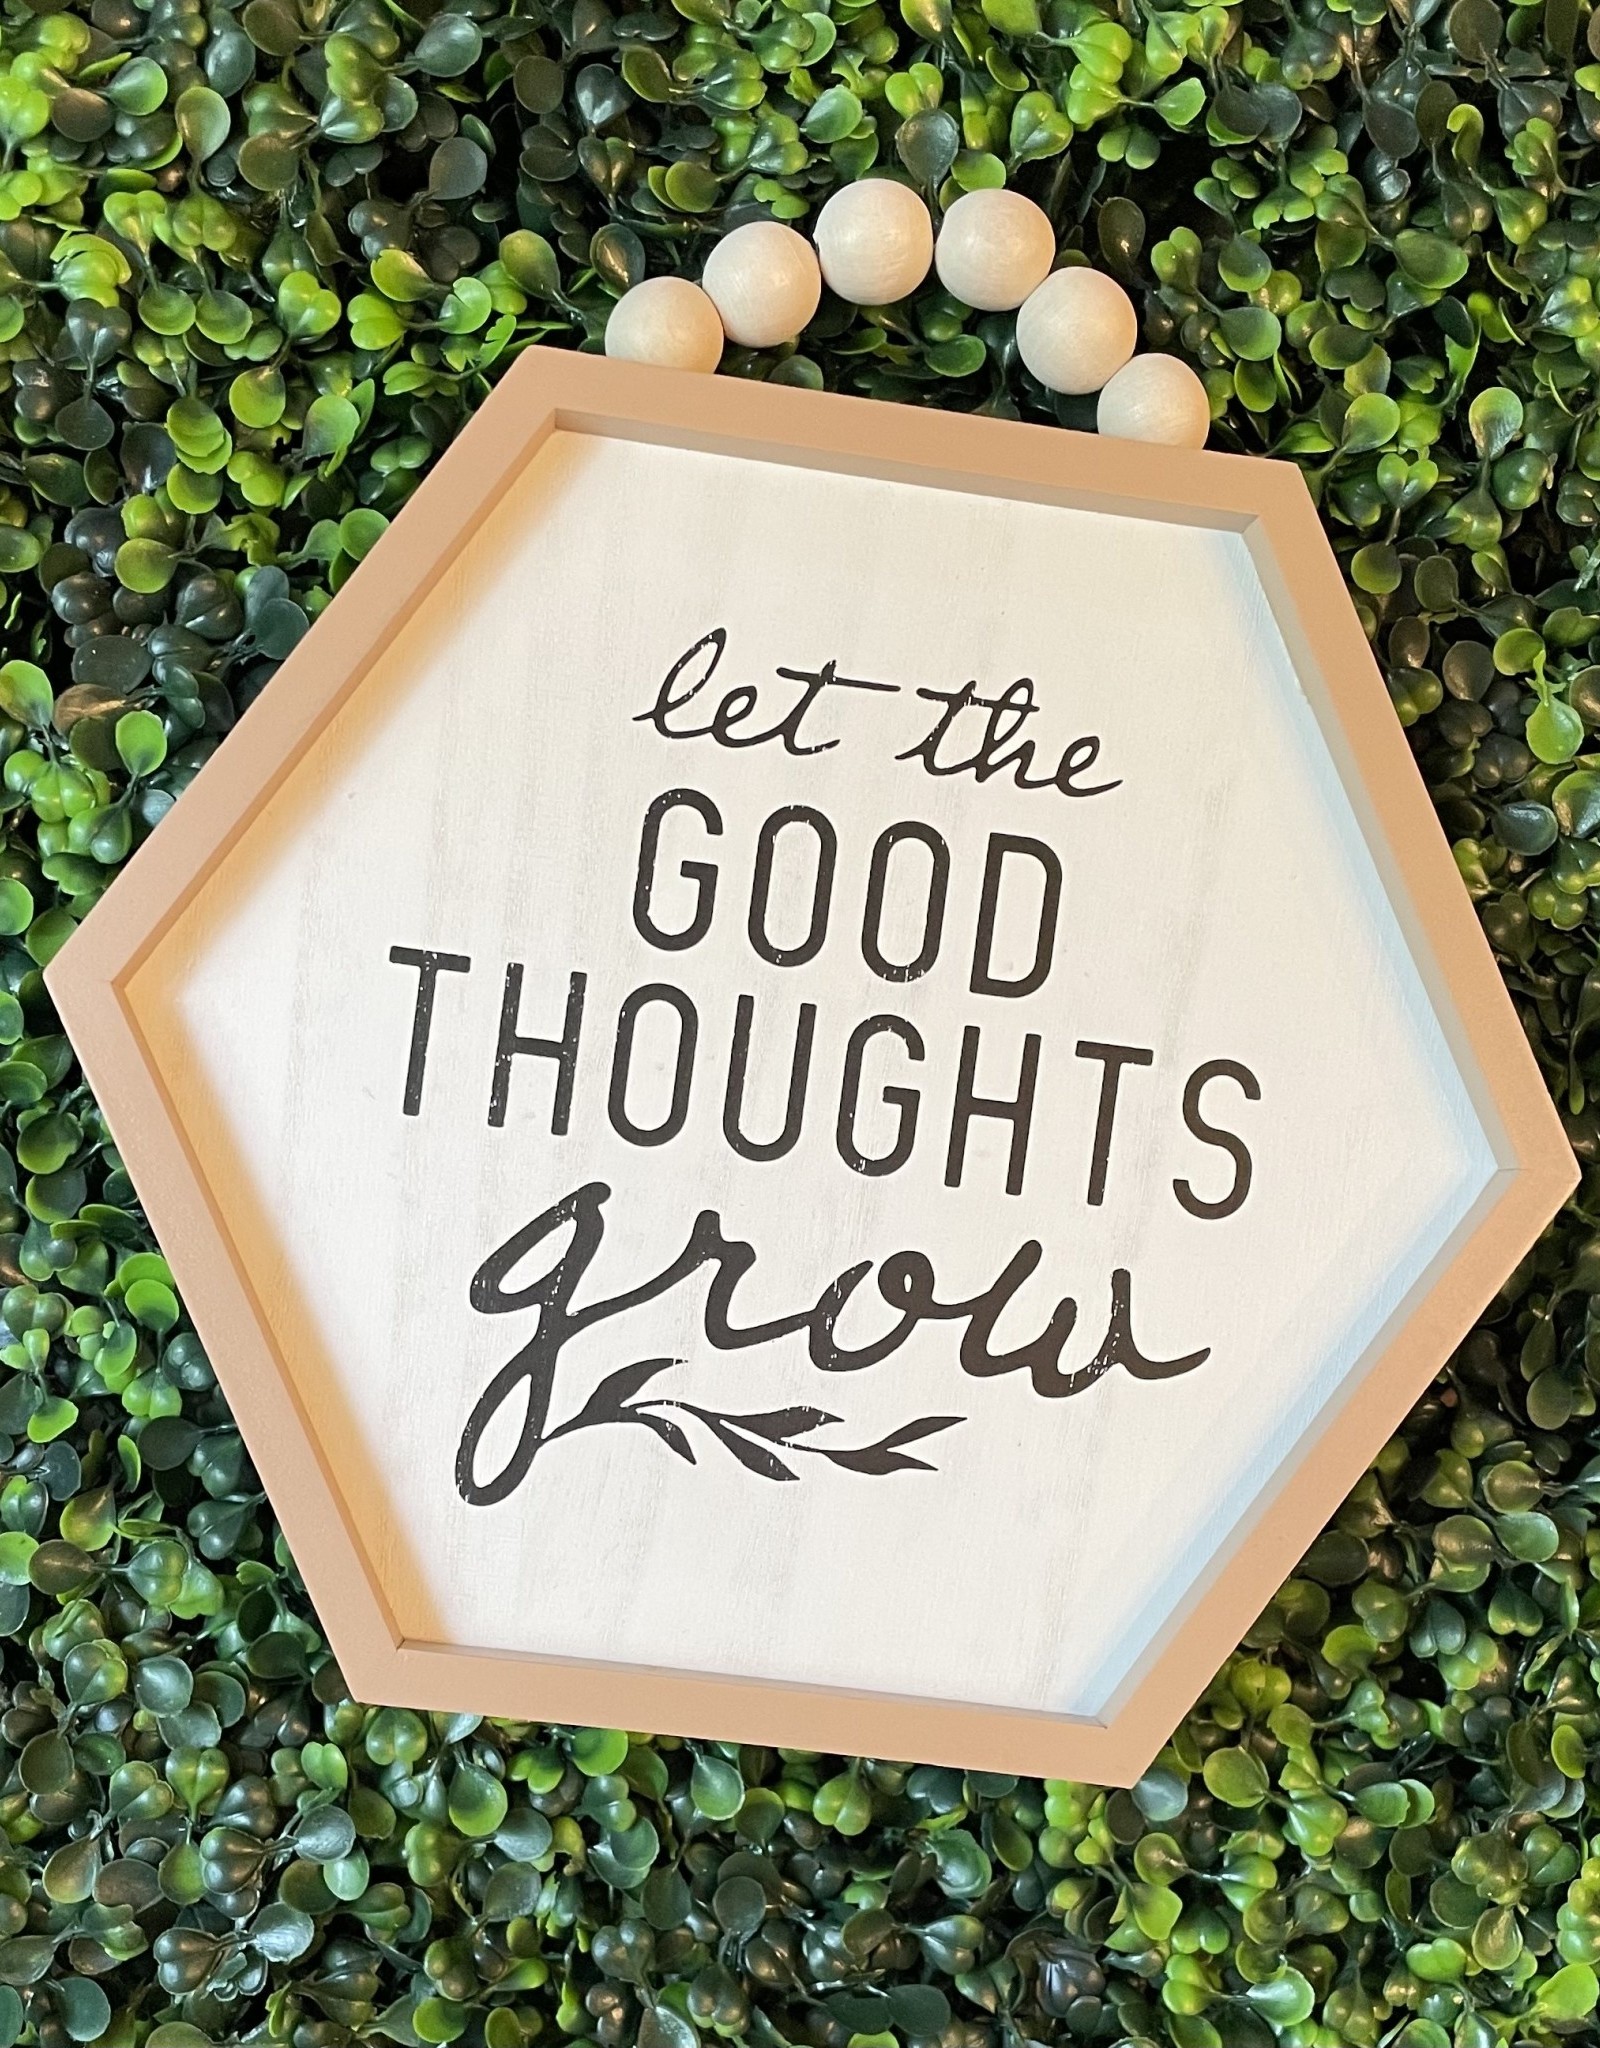 Wink Good Thoughts Grow Decor